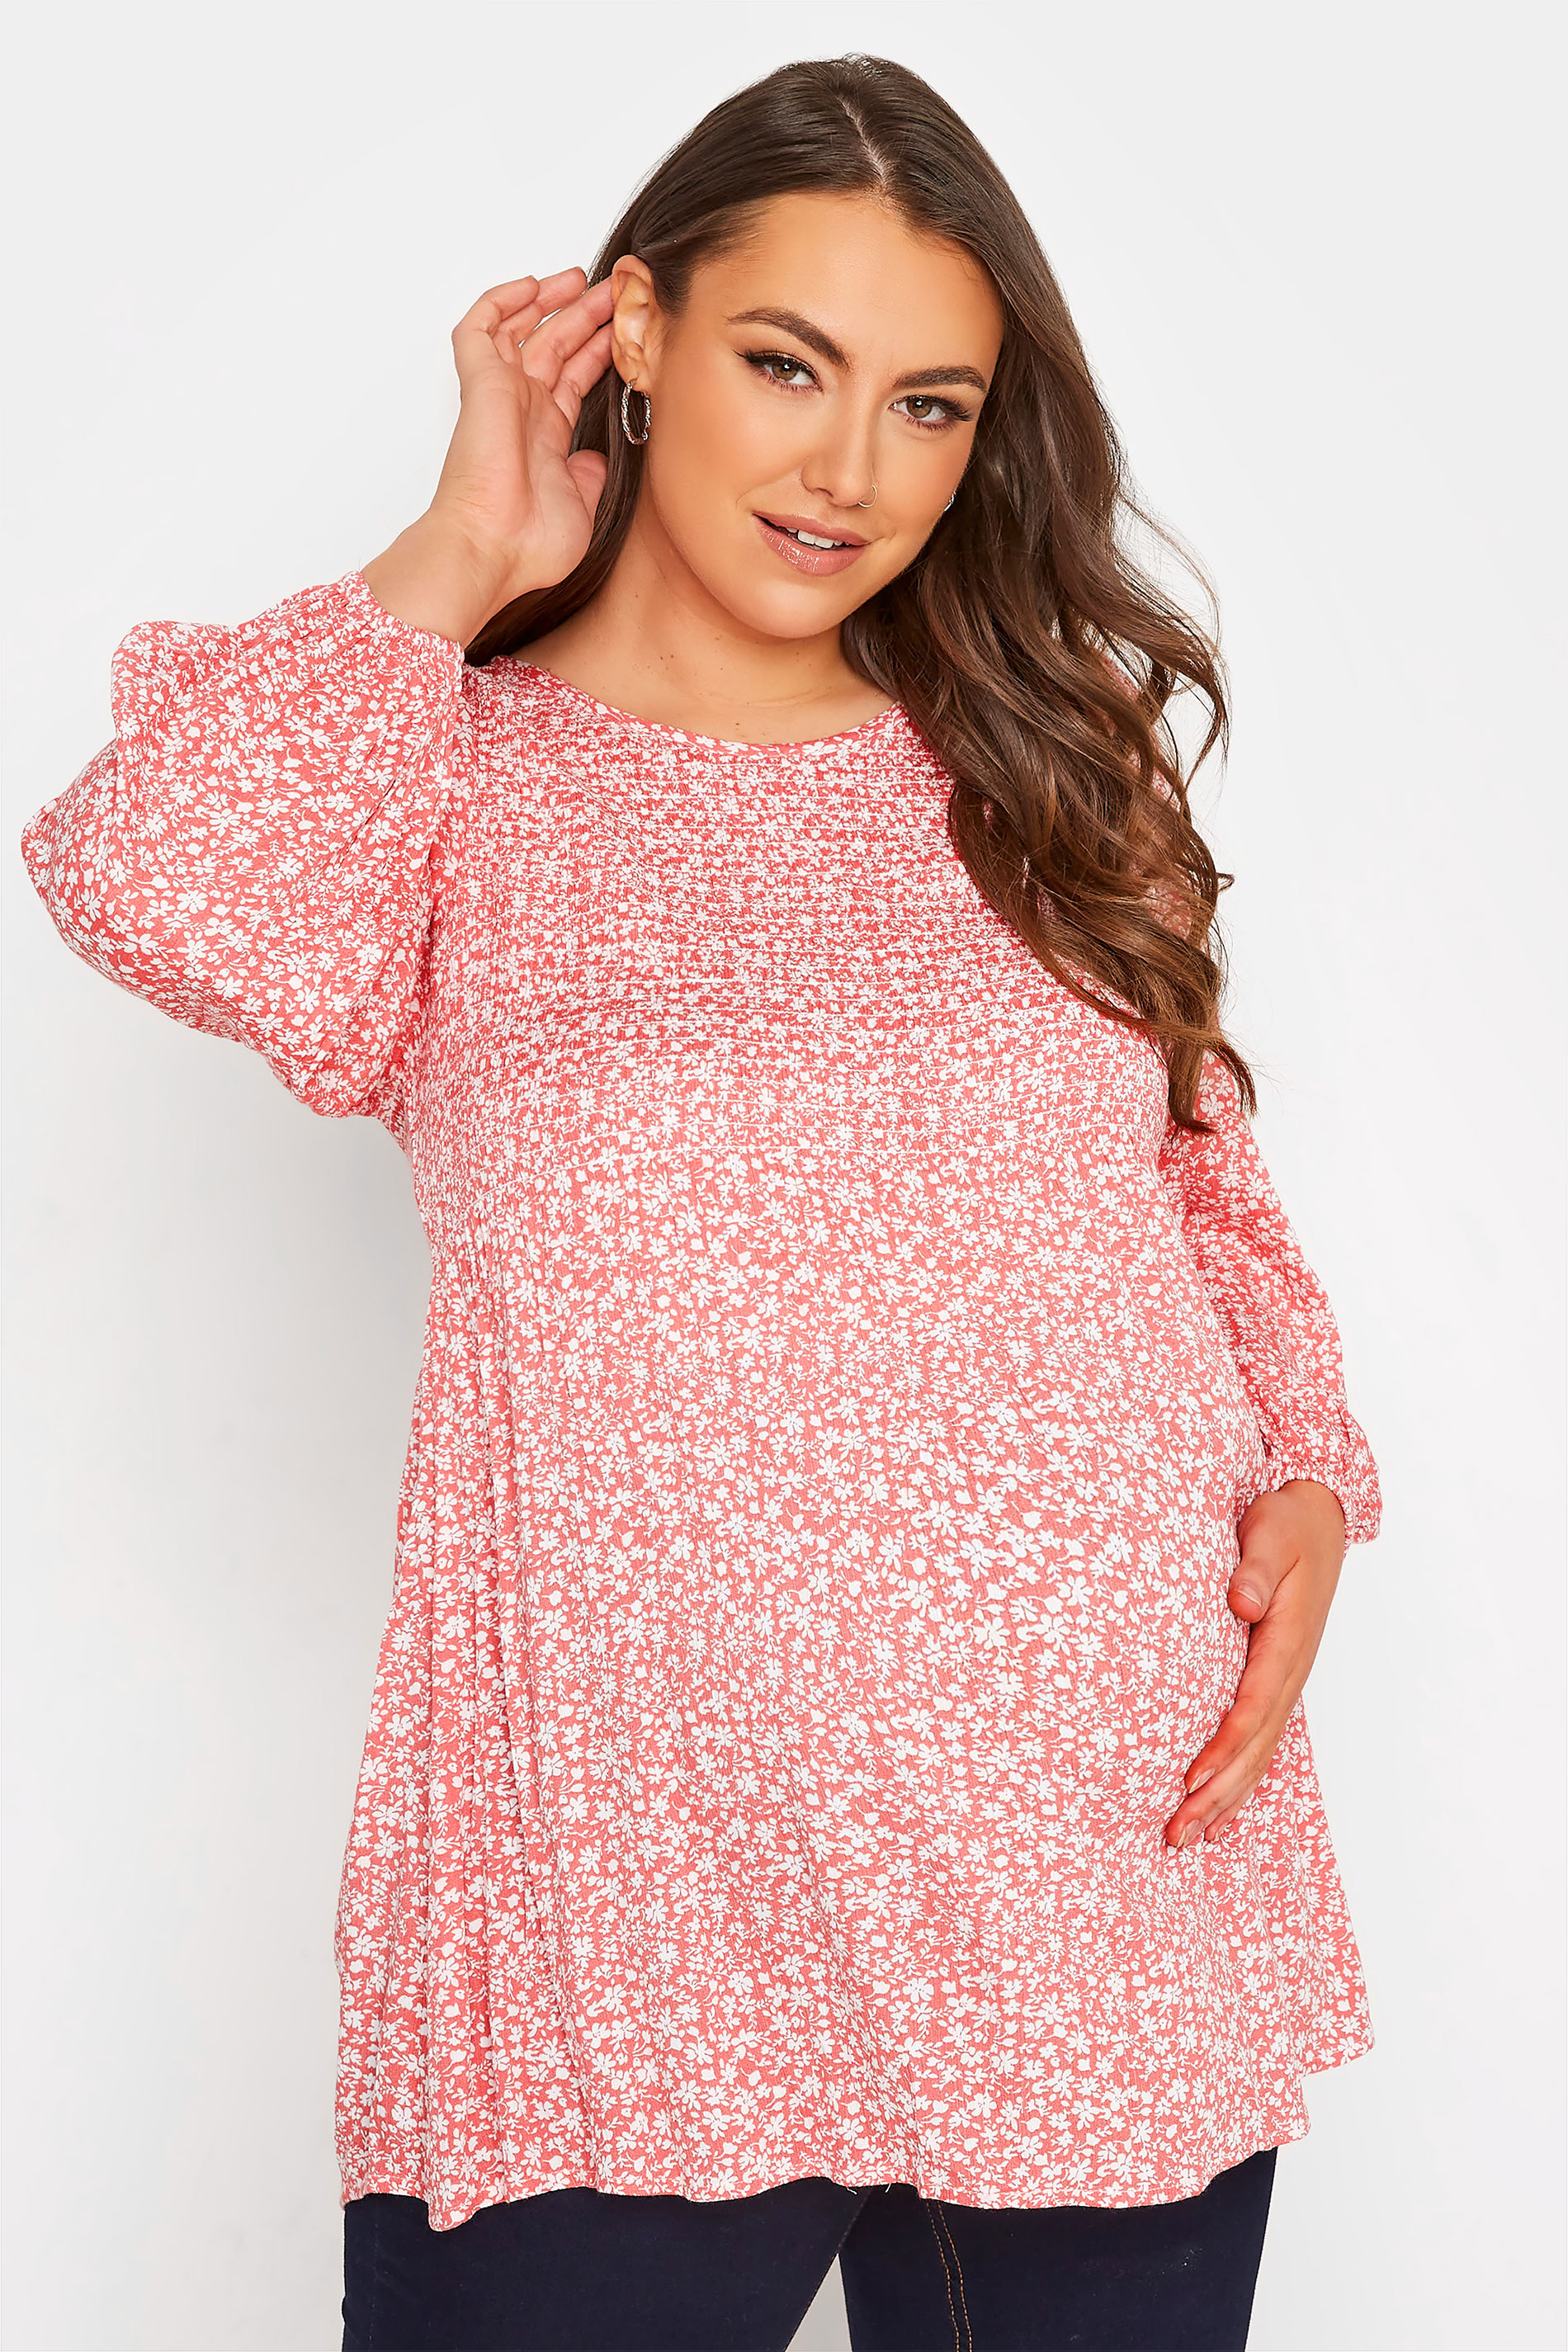 BUMP IT UP MATERNITY Curve Pink Ditsy Print Shirred Swing Top_A.jpg